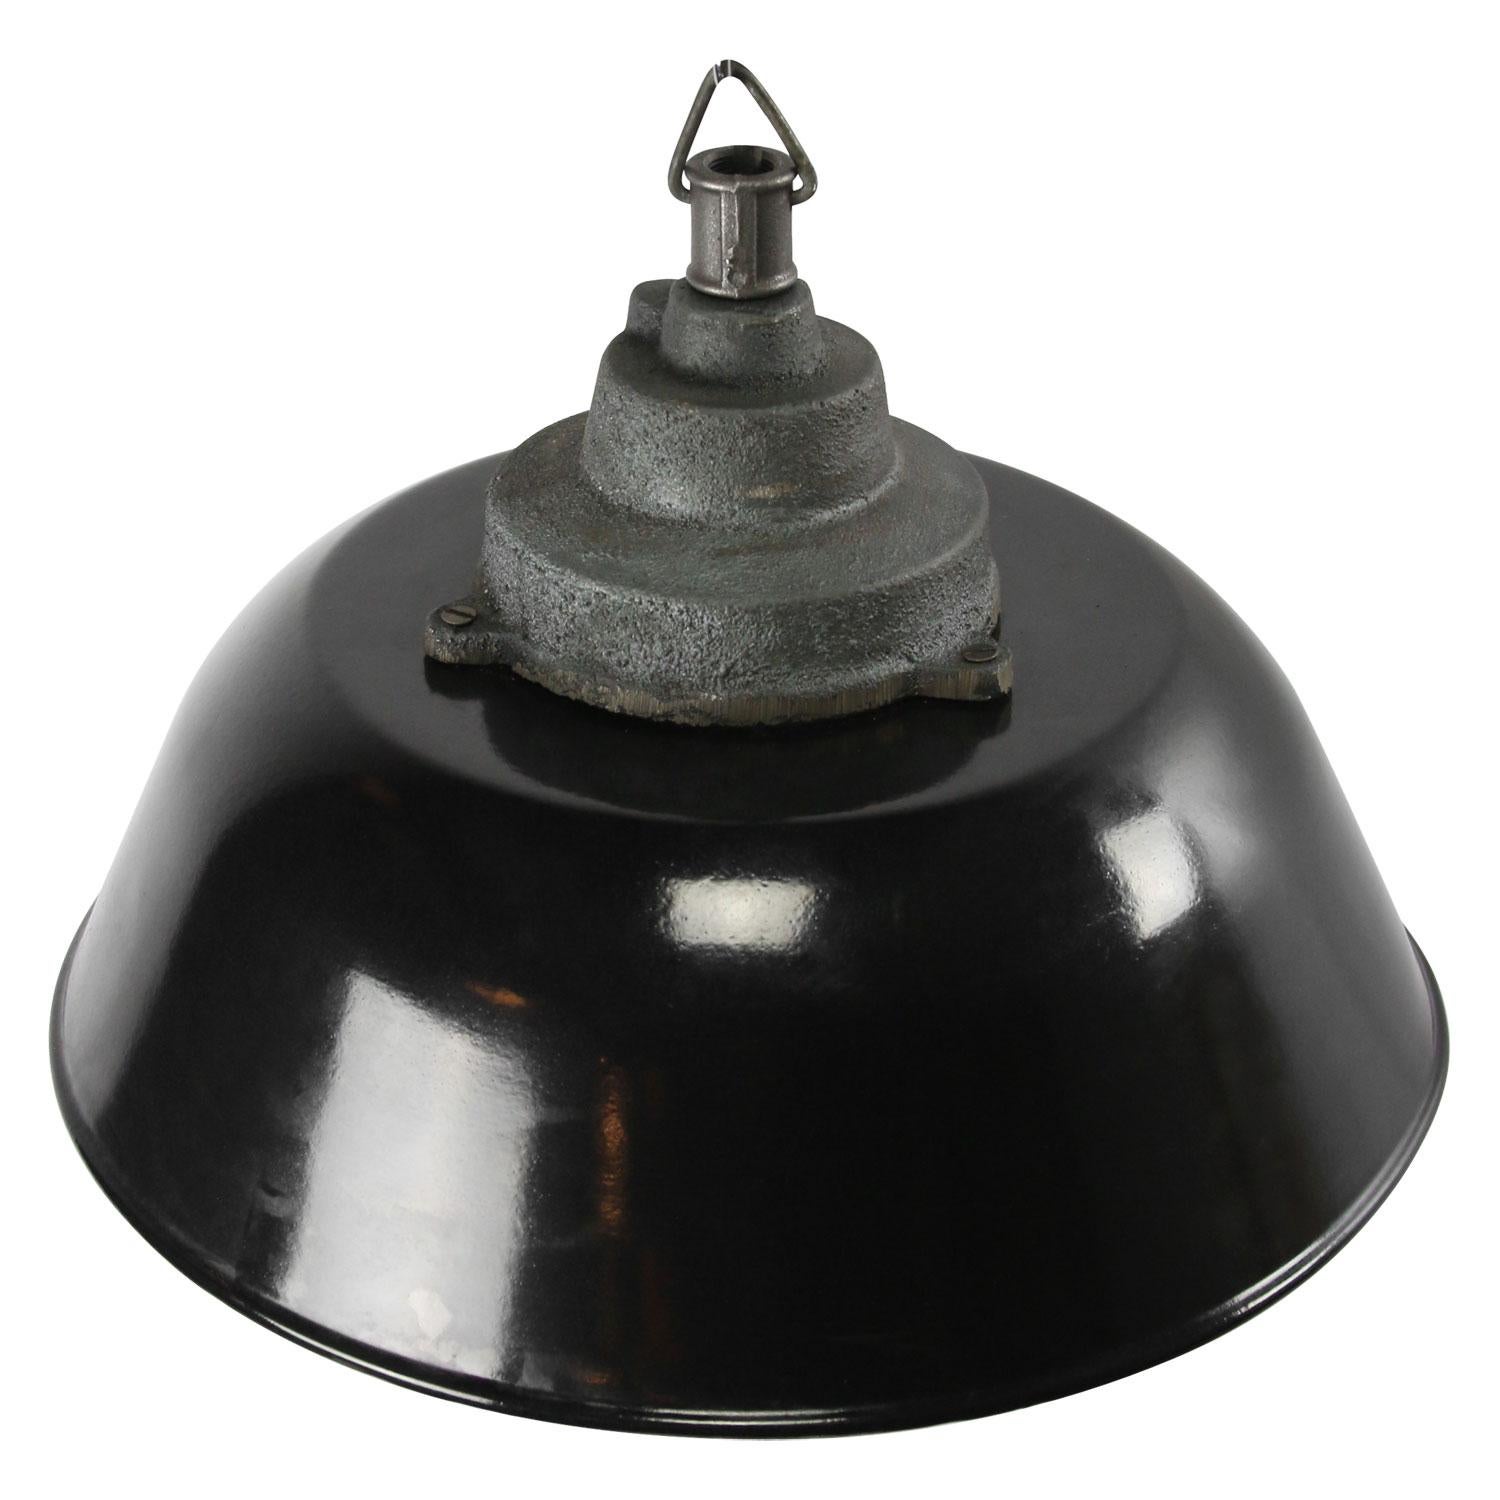 Factory pendant. Black enamel with white interior. Cast iron top.

Measures: Weight 3.2 kg / 7.1 lb

Priced per individual item. All lamps have been made suitable by international standards for incandescent light bulbs, energy-efficient and LED